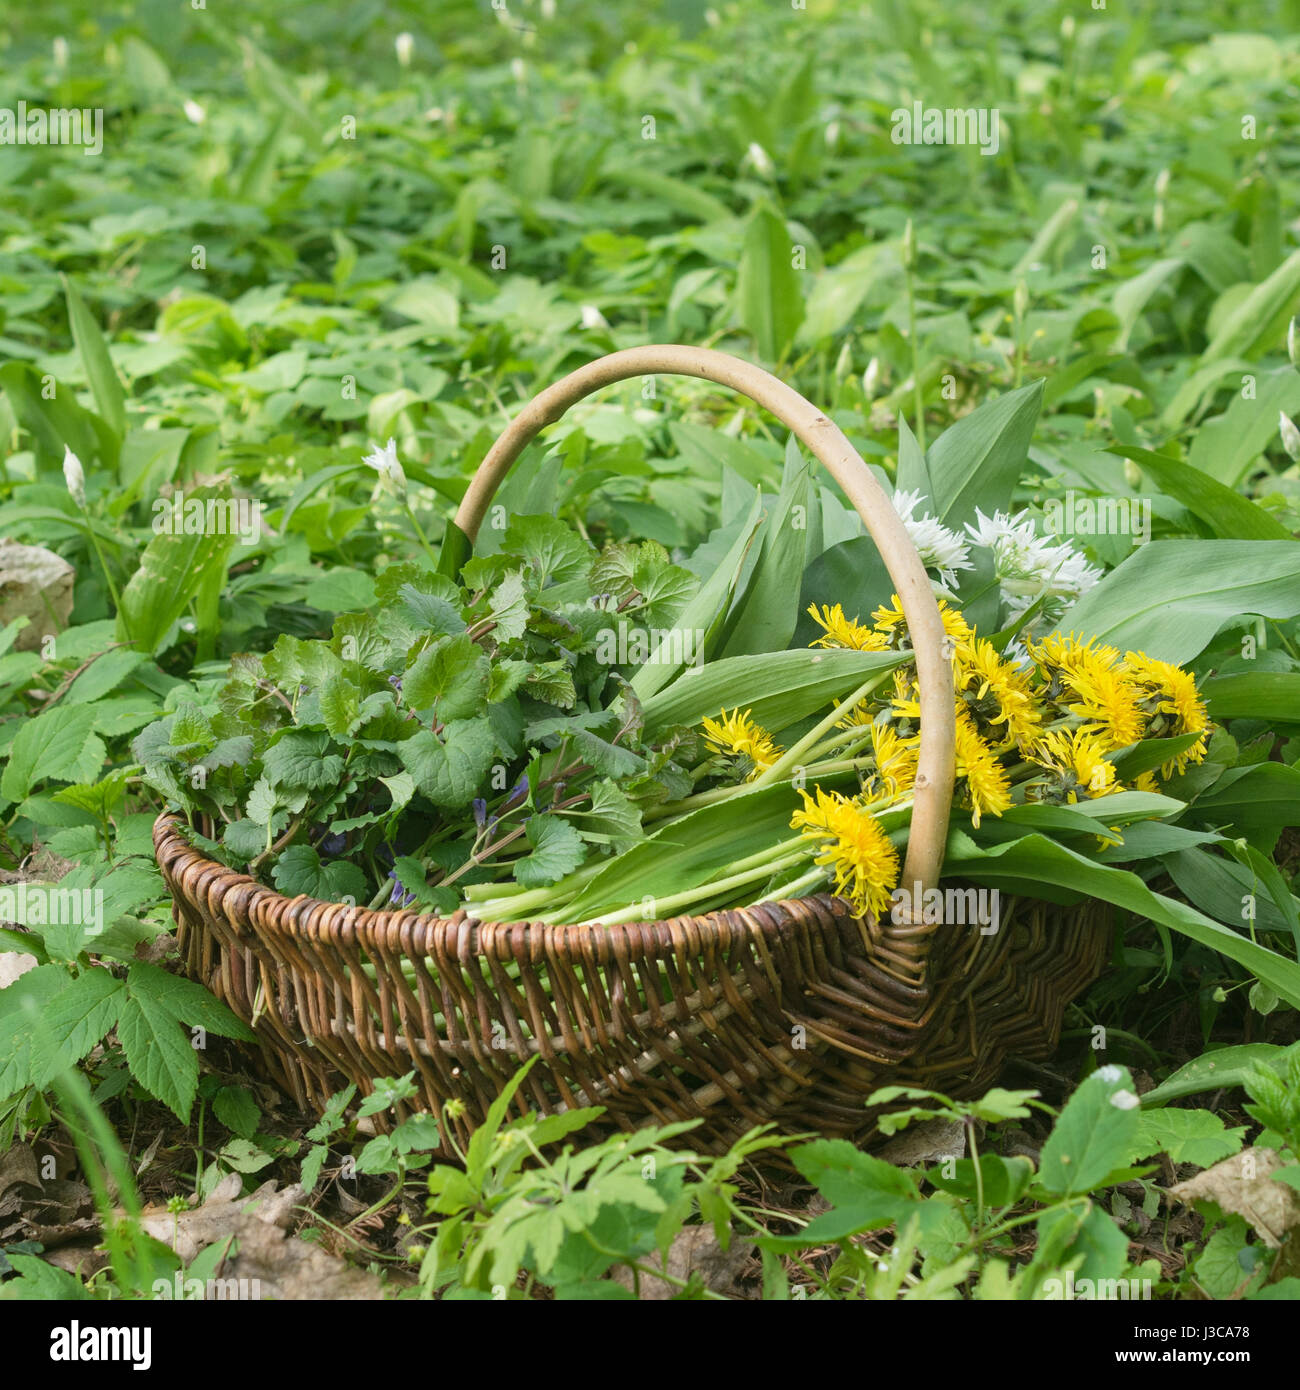 Basket with collected wild herbs in the forest Stock Photo